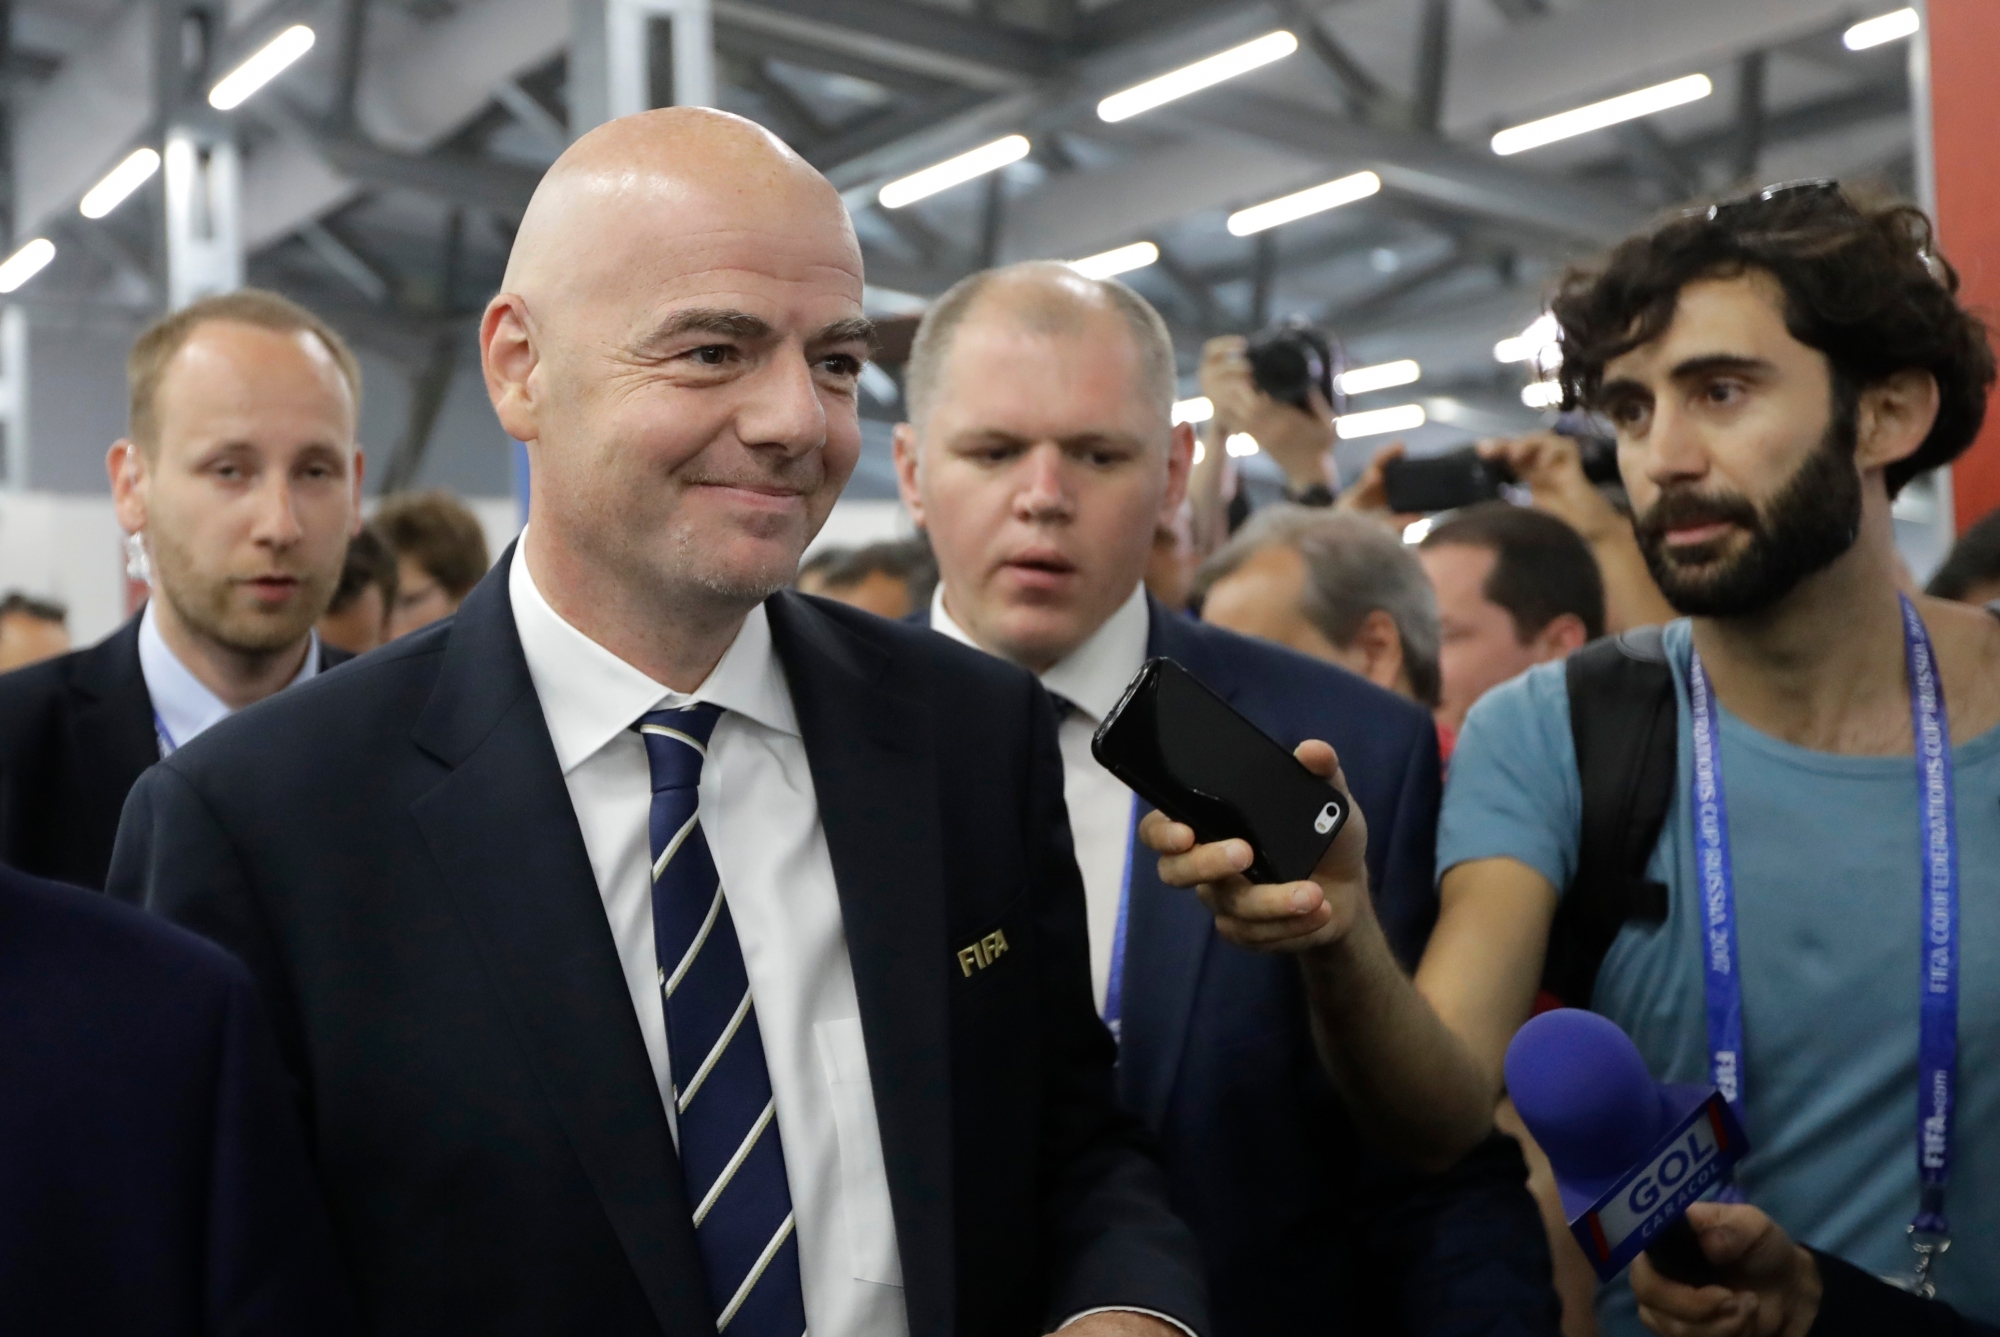 Surrounded by officials FIFA President Gianni Infantino seen during his visit to Media centre prior the Group A soccer match between Portugal and Mexico, at the Kazan Arena, Russia, Sunday, June 18, 2017. (AP Photo/Sergei Grits) Soccer Confed Cup Portugal Mexico